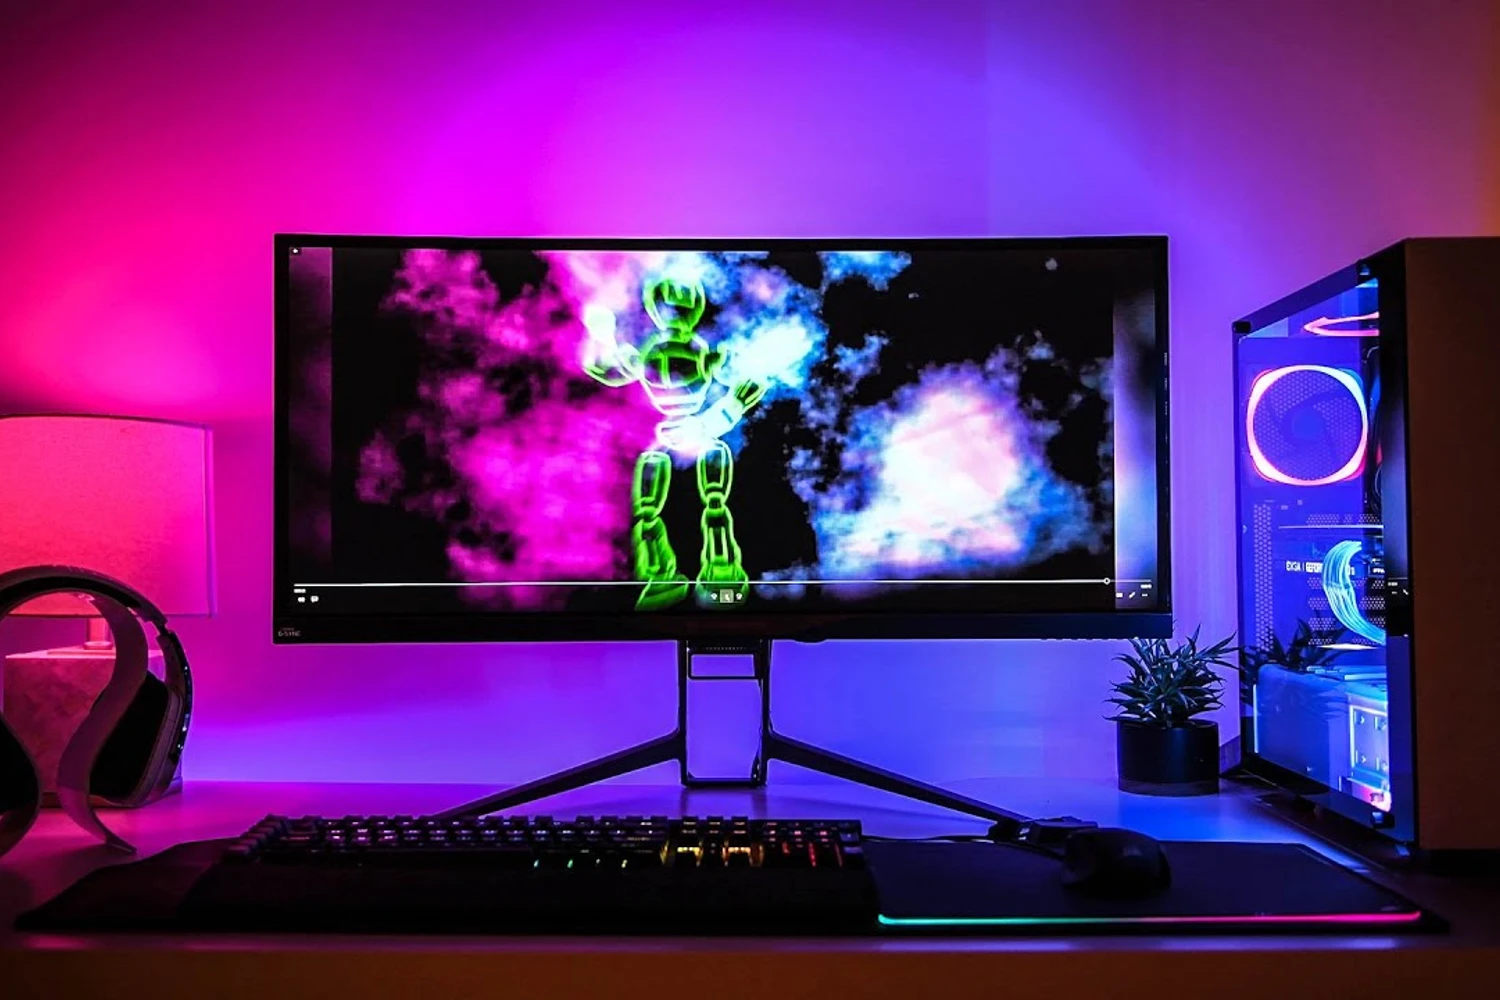 LED LIGHTS BEHIND COMPUTER AND TV SCREENS